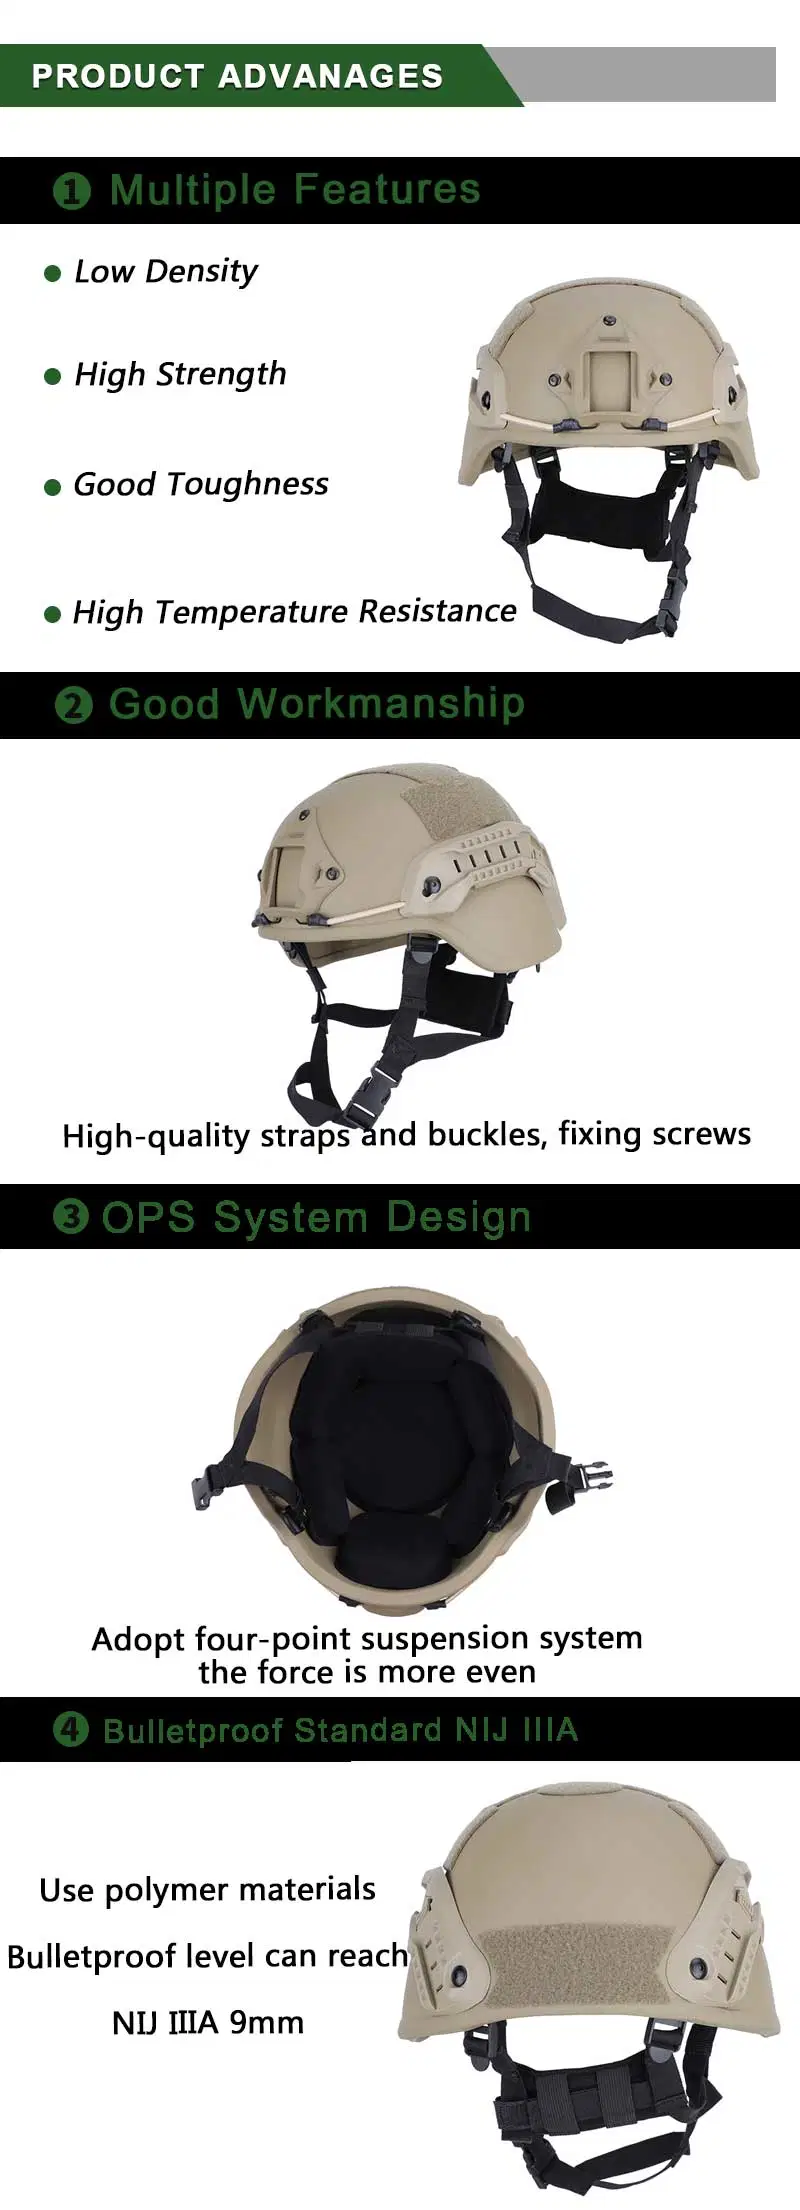 Double Safe PE/Aramid Ballistic Army Mich Tactical Combat Comfortable Protective Military Safety Bullet Proof Helmet